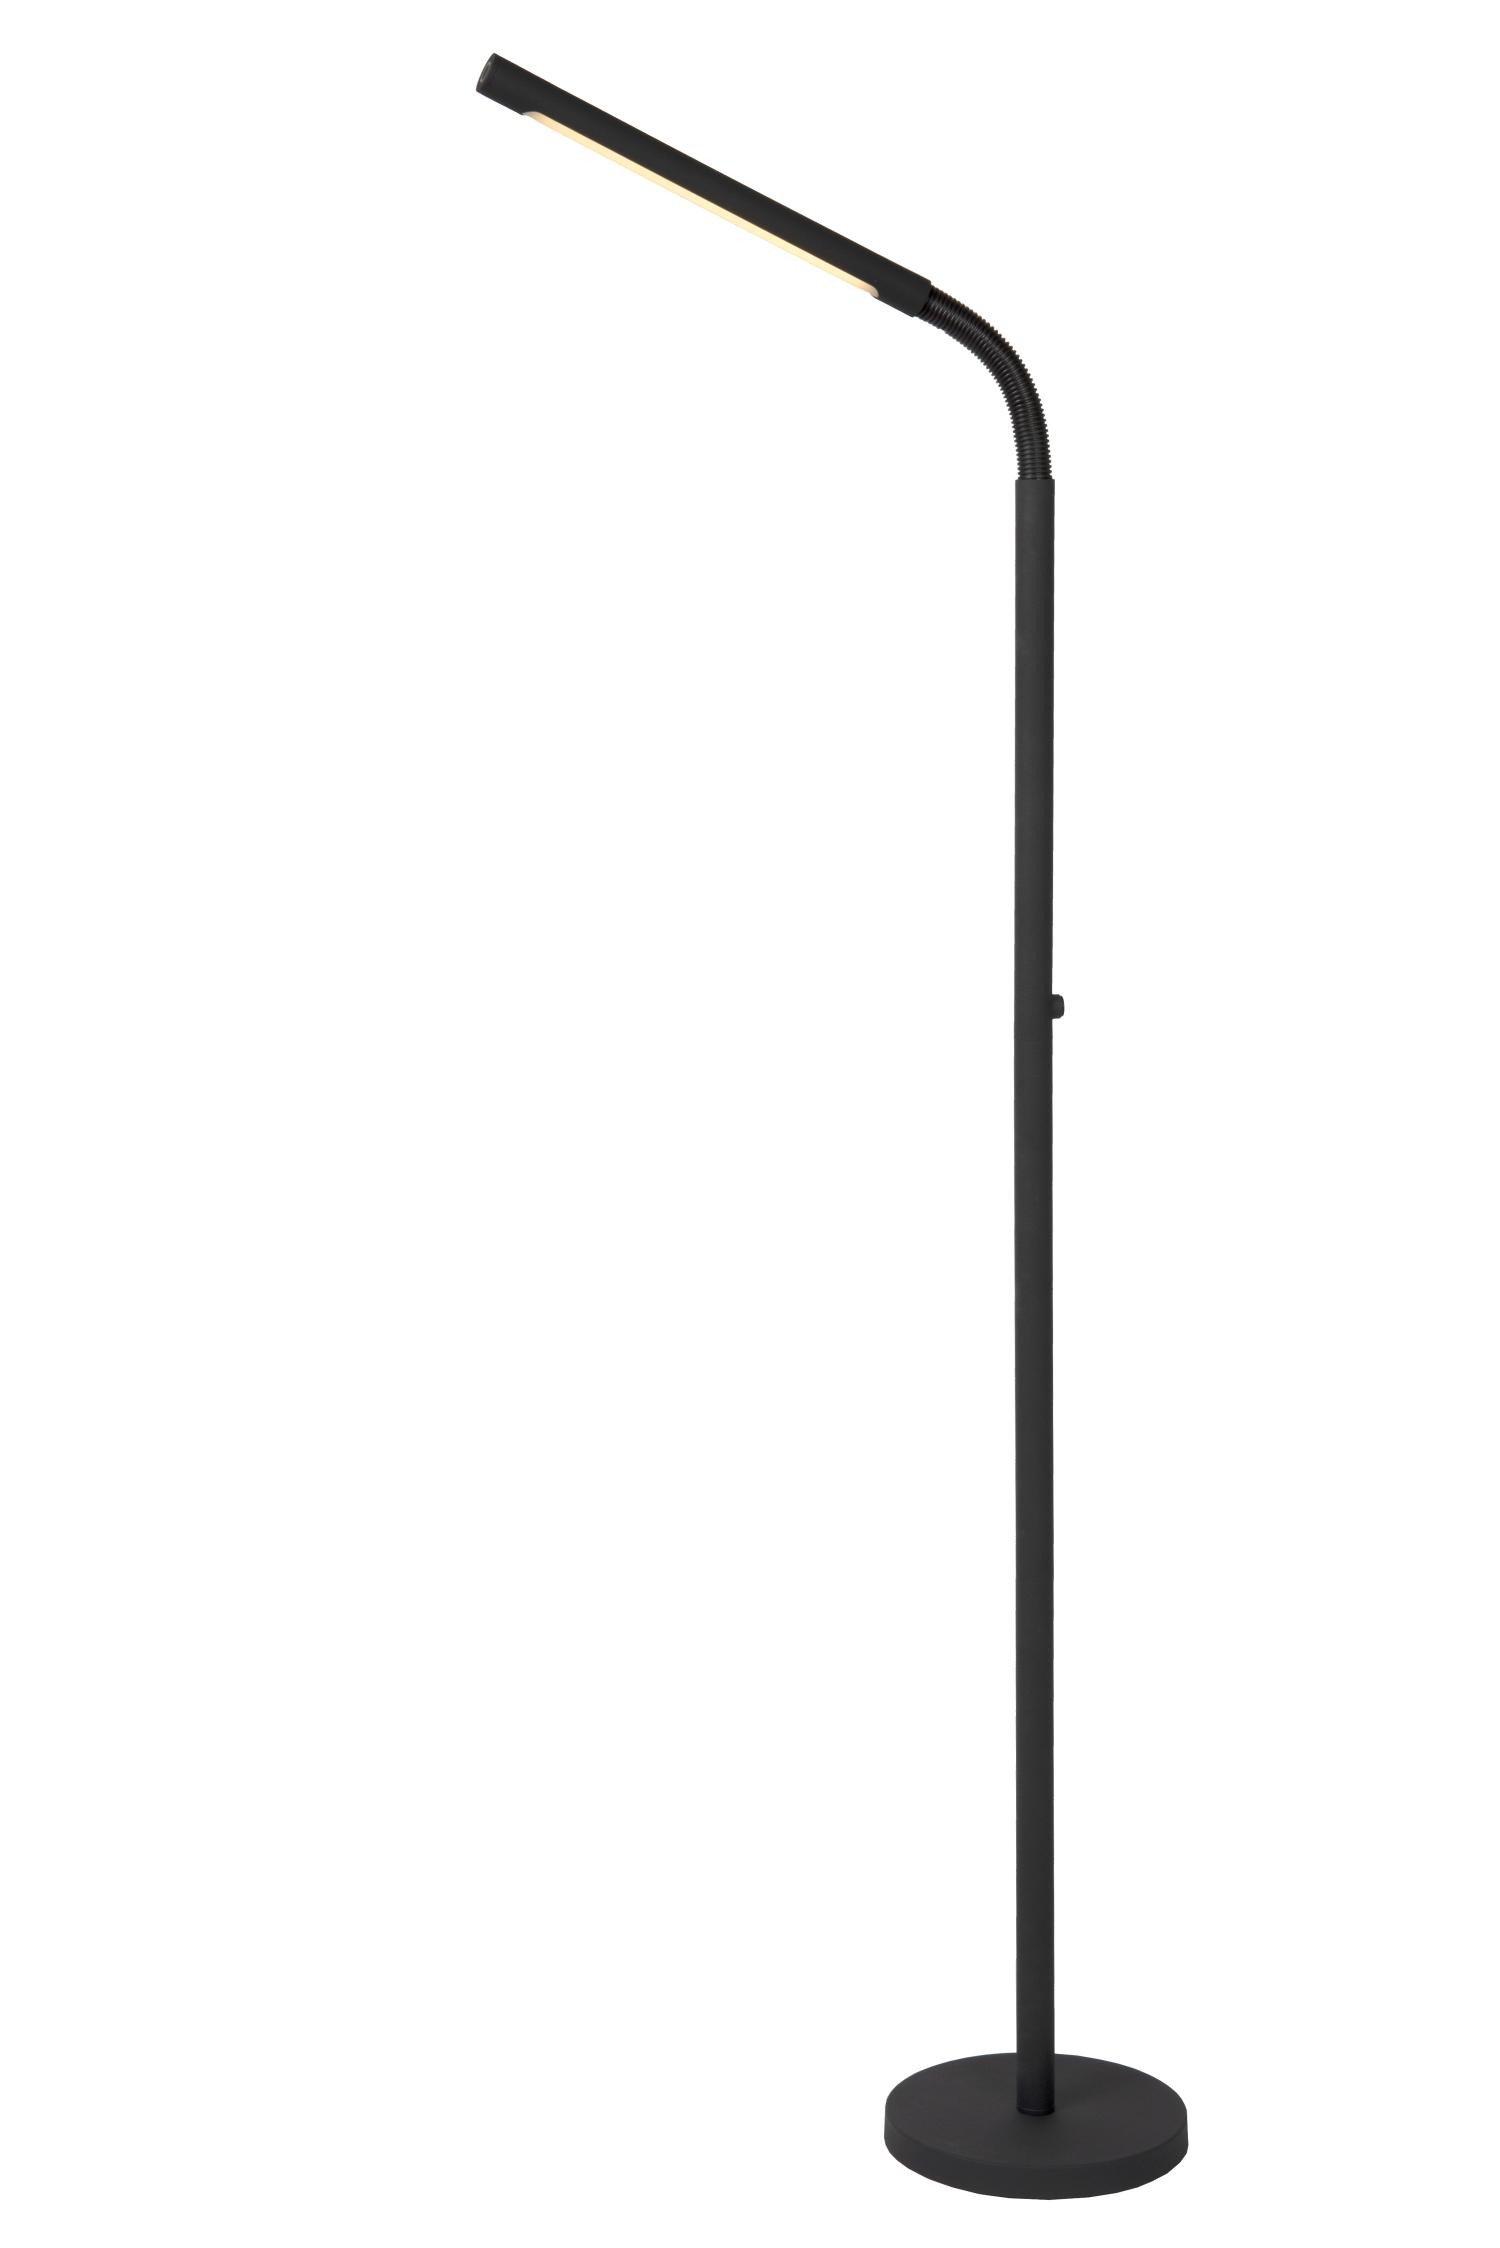 Lucide Gilly Classic Floor Reading Lamp LED Dim. 1x3W 2700K Black